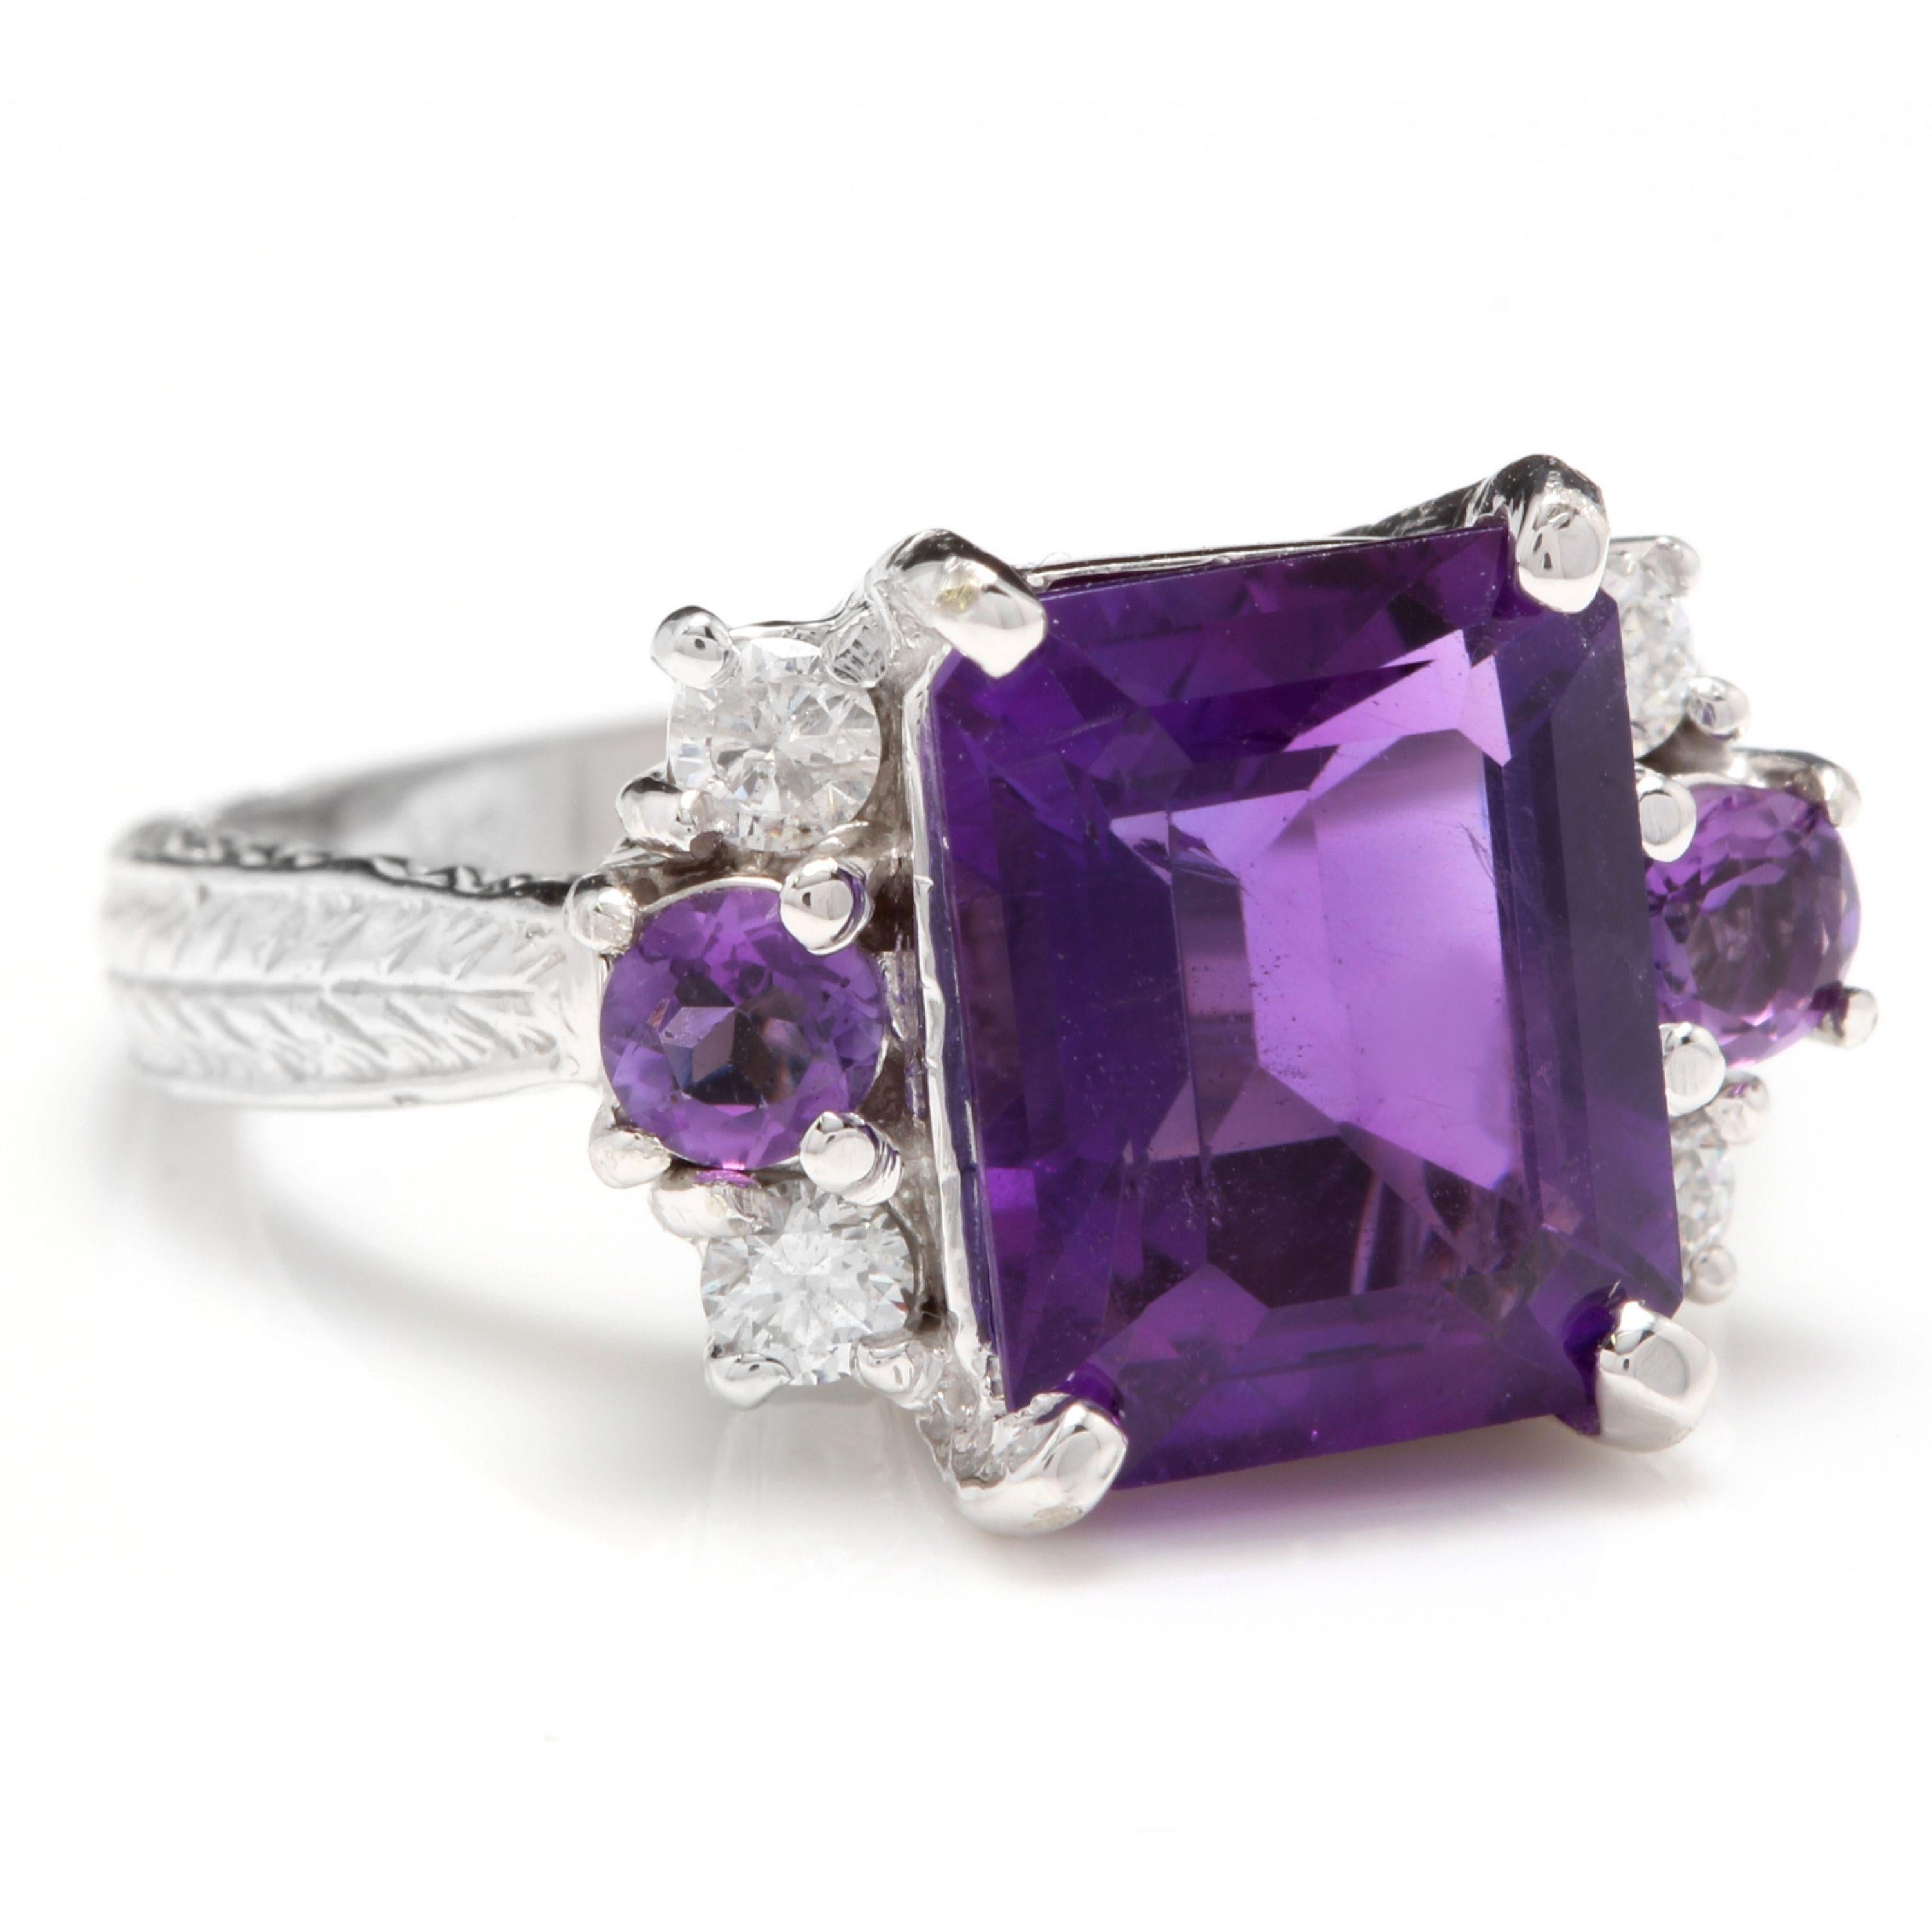 4.70 Carats Natural Amethyst and Diamond 14K Solid White Gold Ring

Total Natural Amethyst Weight is: Approx. 4.40 Carats

Center Emerald Cut Amethyst Weight is: Approx. 4.00 Carats

Center Amethyst Measures: Approx. 11.00mm x 9.00mm

Natural Round